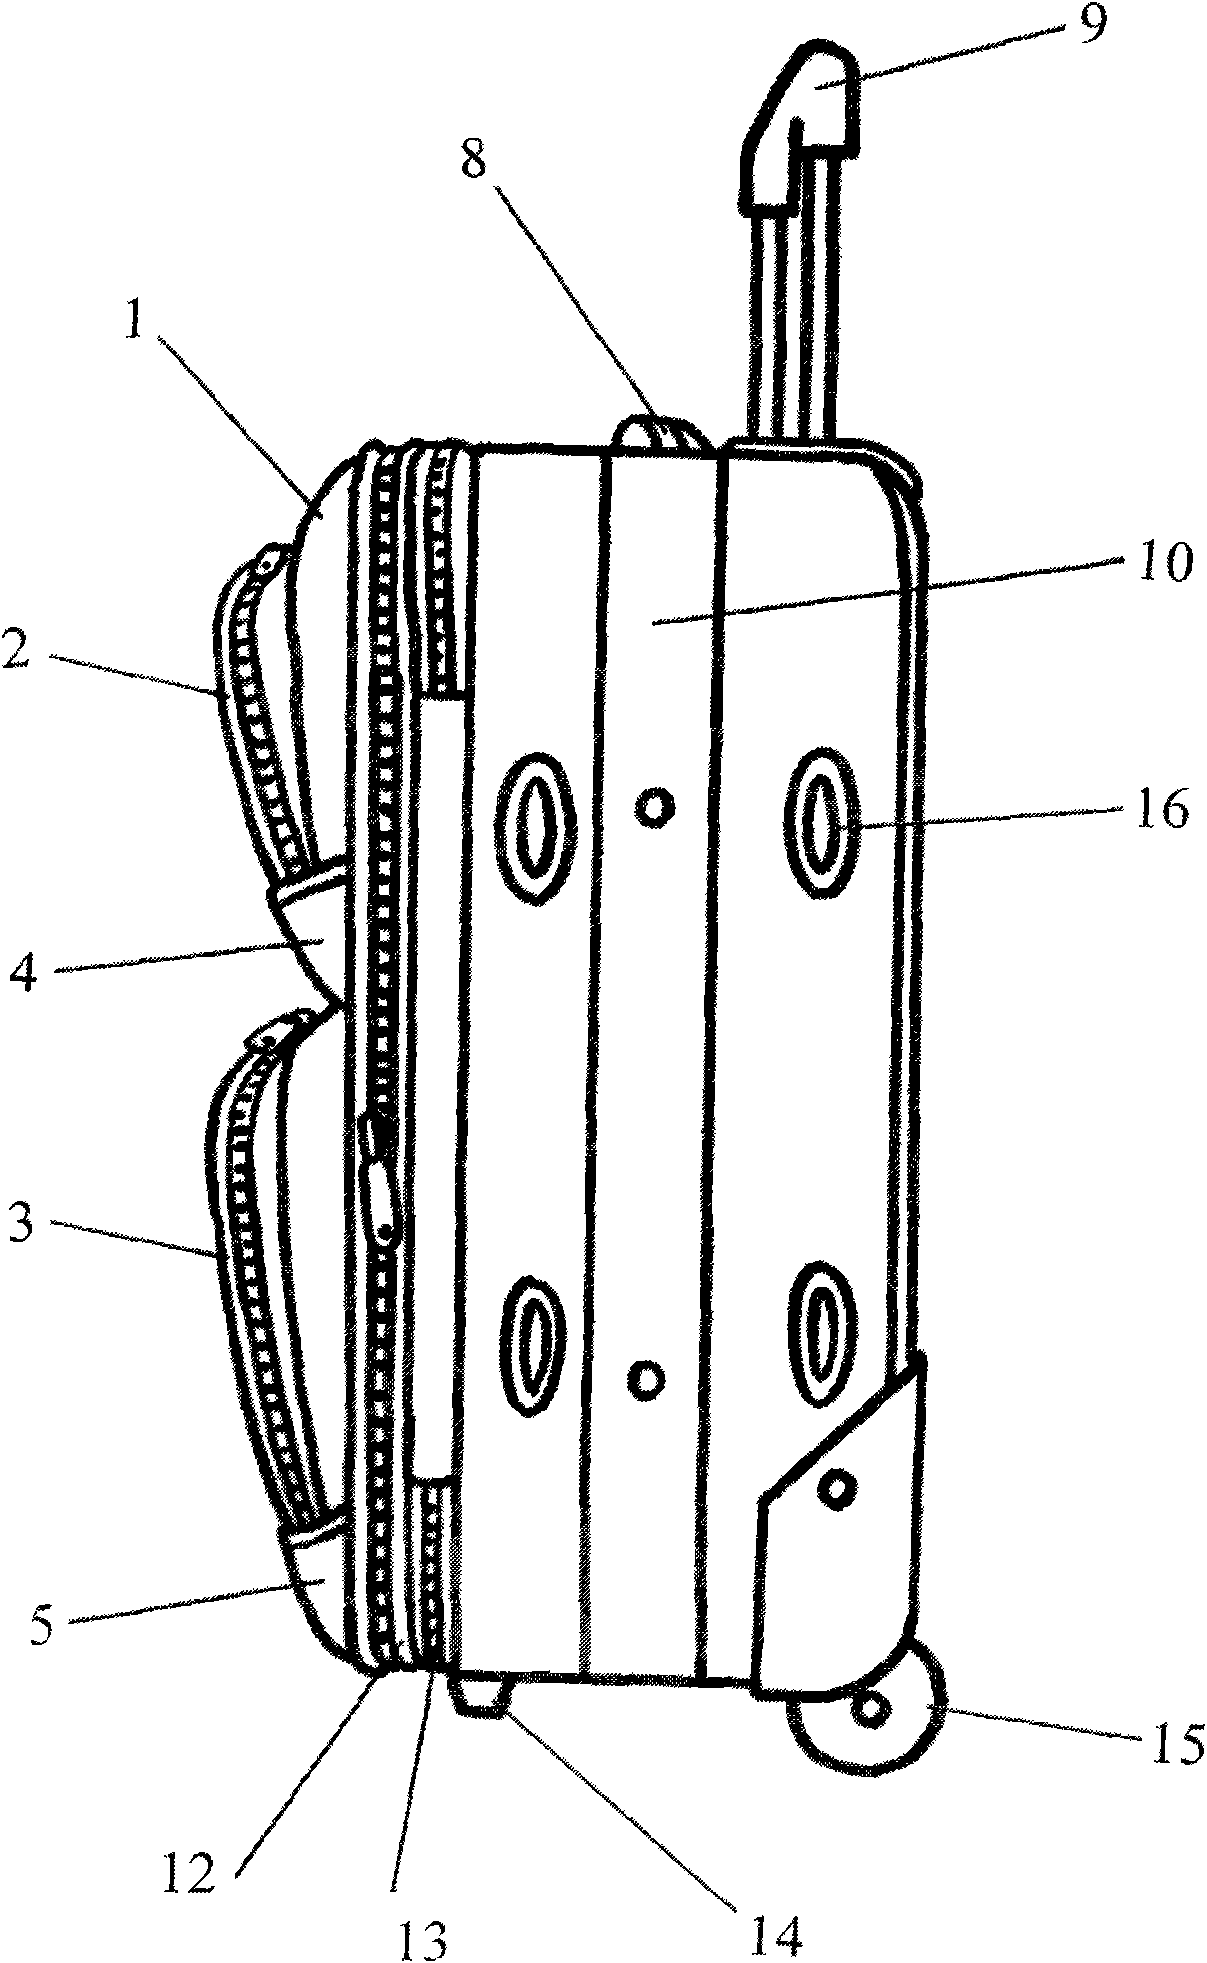 Pull-rod case with iron bar supporting feet and pocket supporting cloths